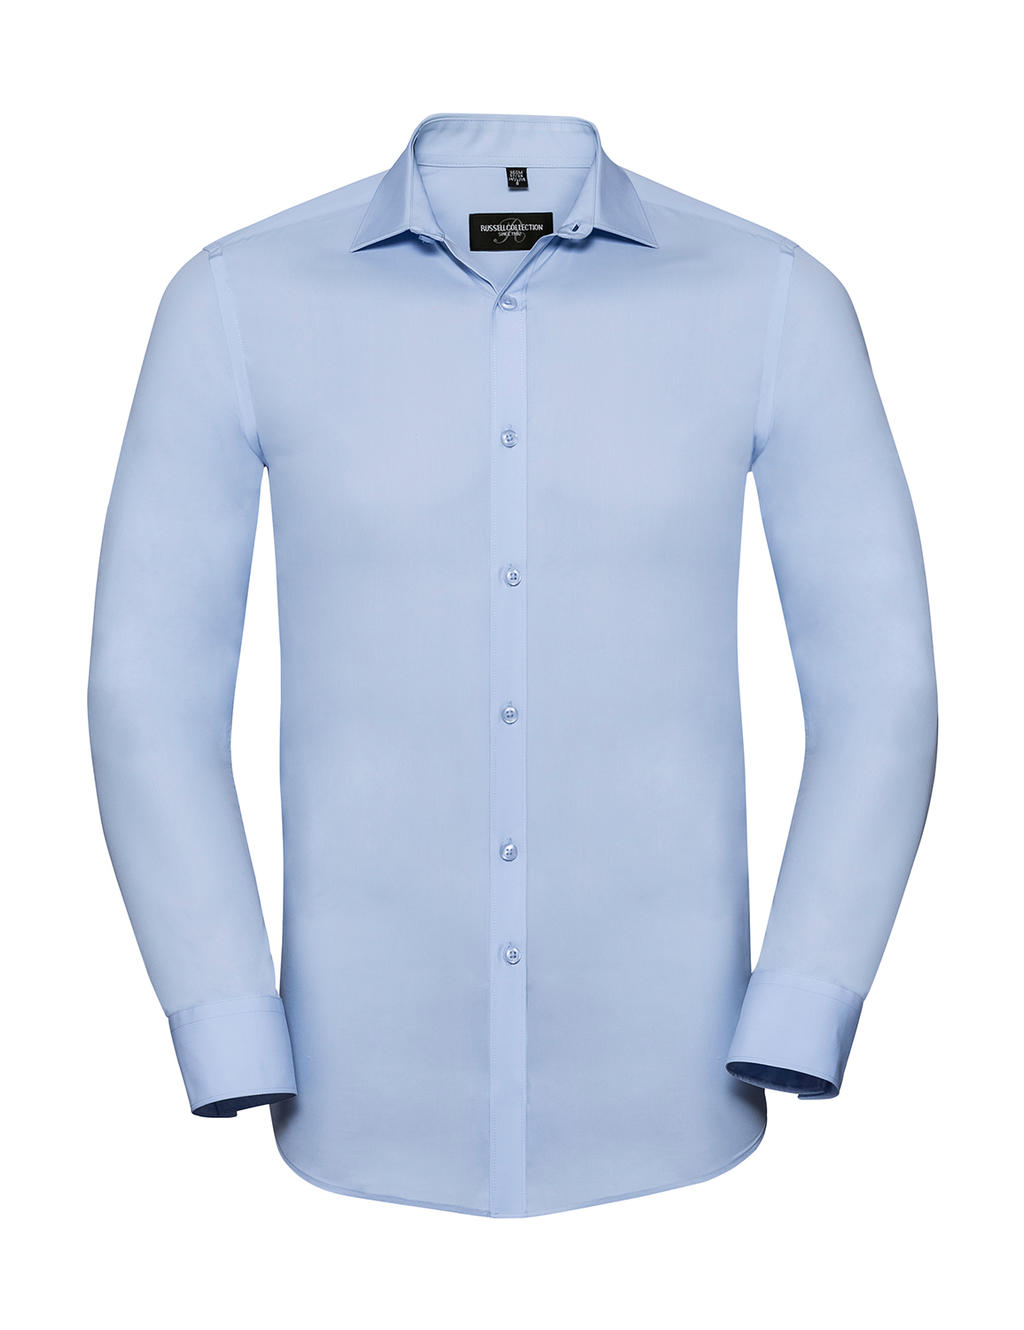  Mens LS Ultimate Stretch Shirt in Farbe Bright Sky